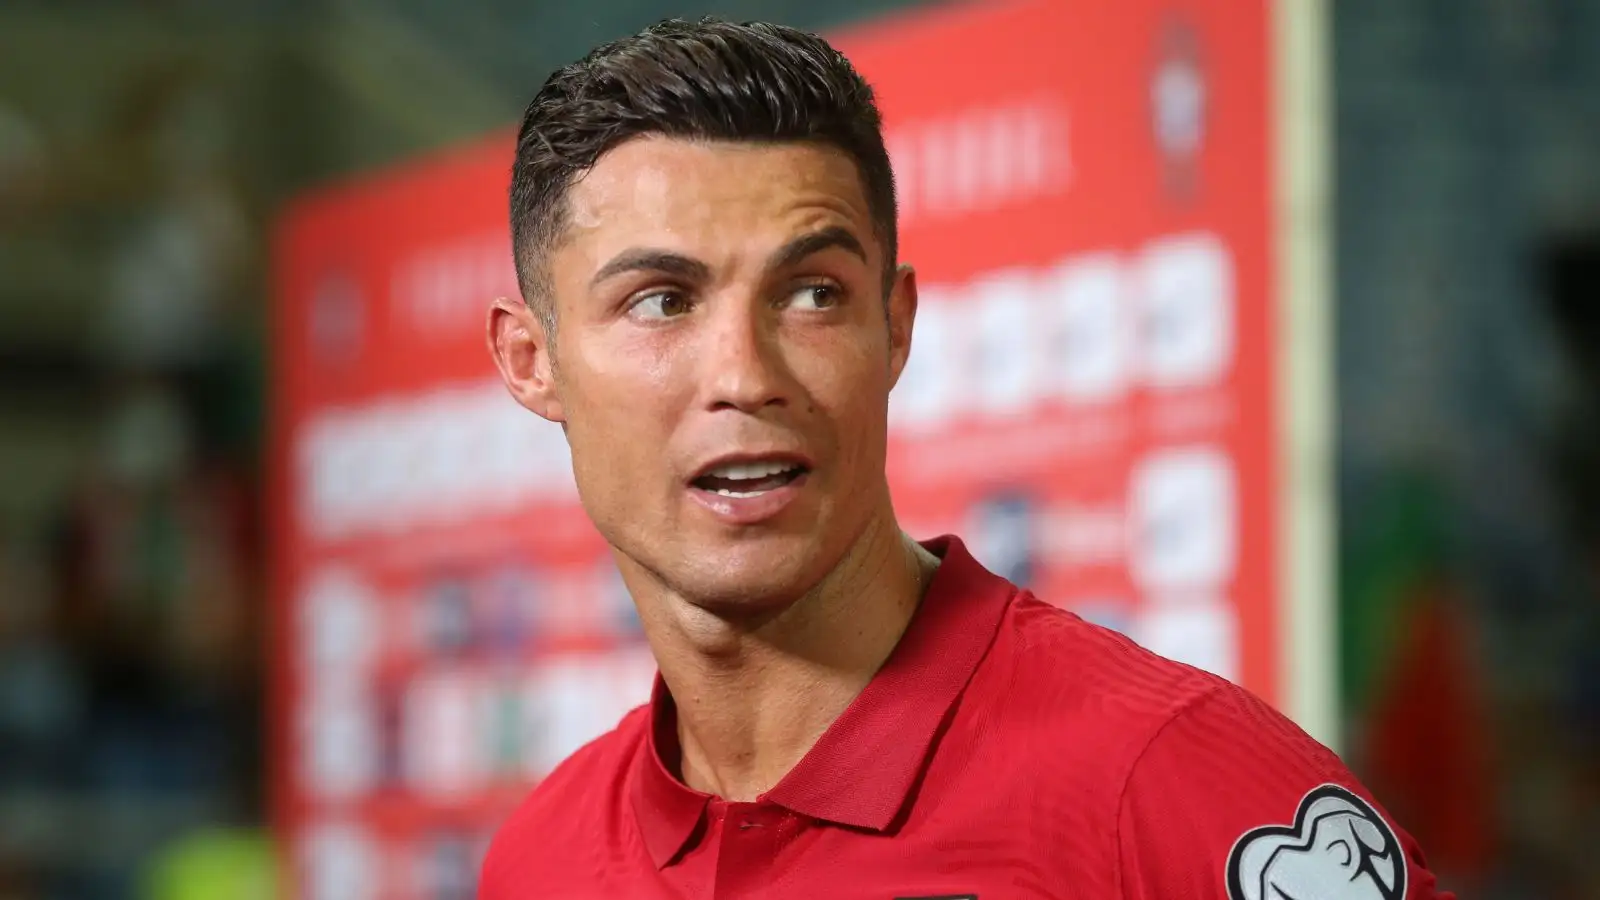 Cristiano Ronaldo on Portugal duty for the World Cup after an explosive interview burned his bridges at Manchester United